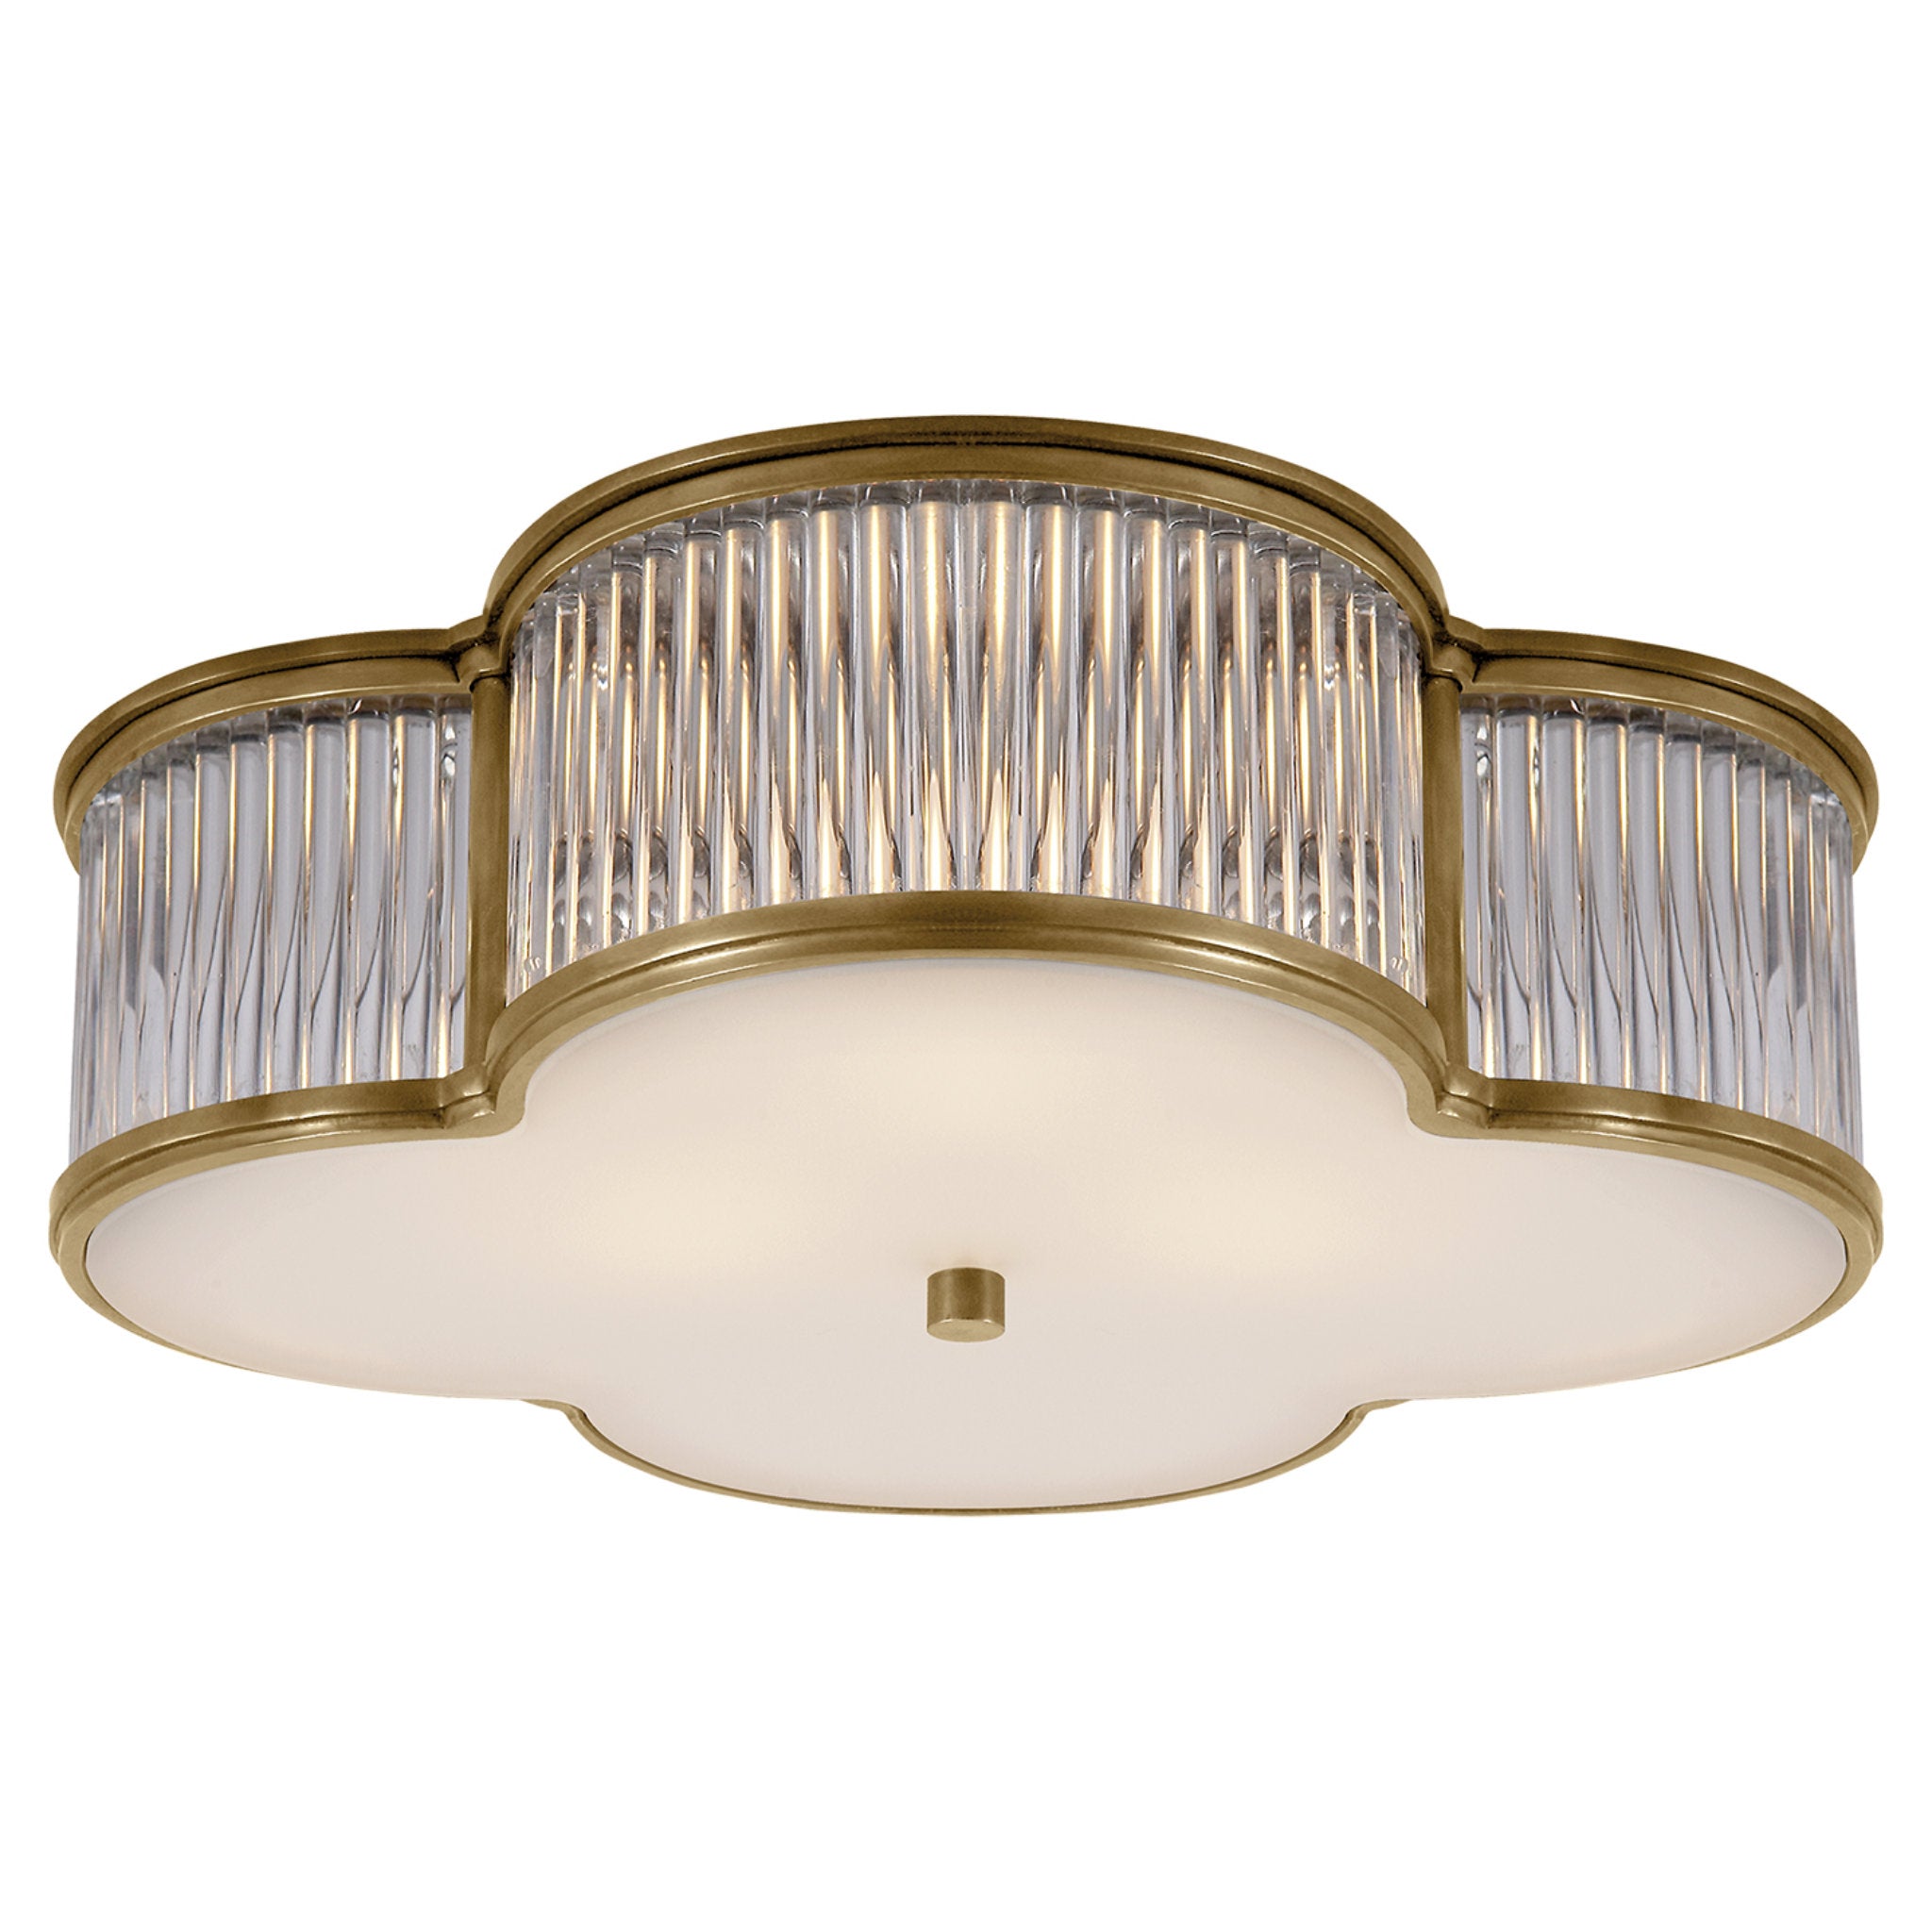 Alexa Hampton Basil 17" Flush Mount in Natural Brass and Clear Glass Rods with Frosted Glass